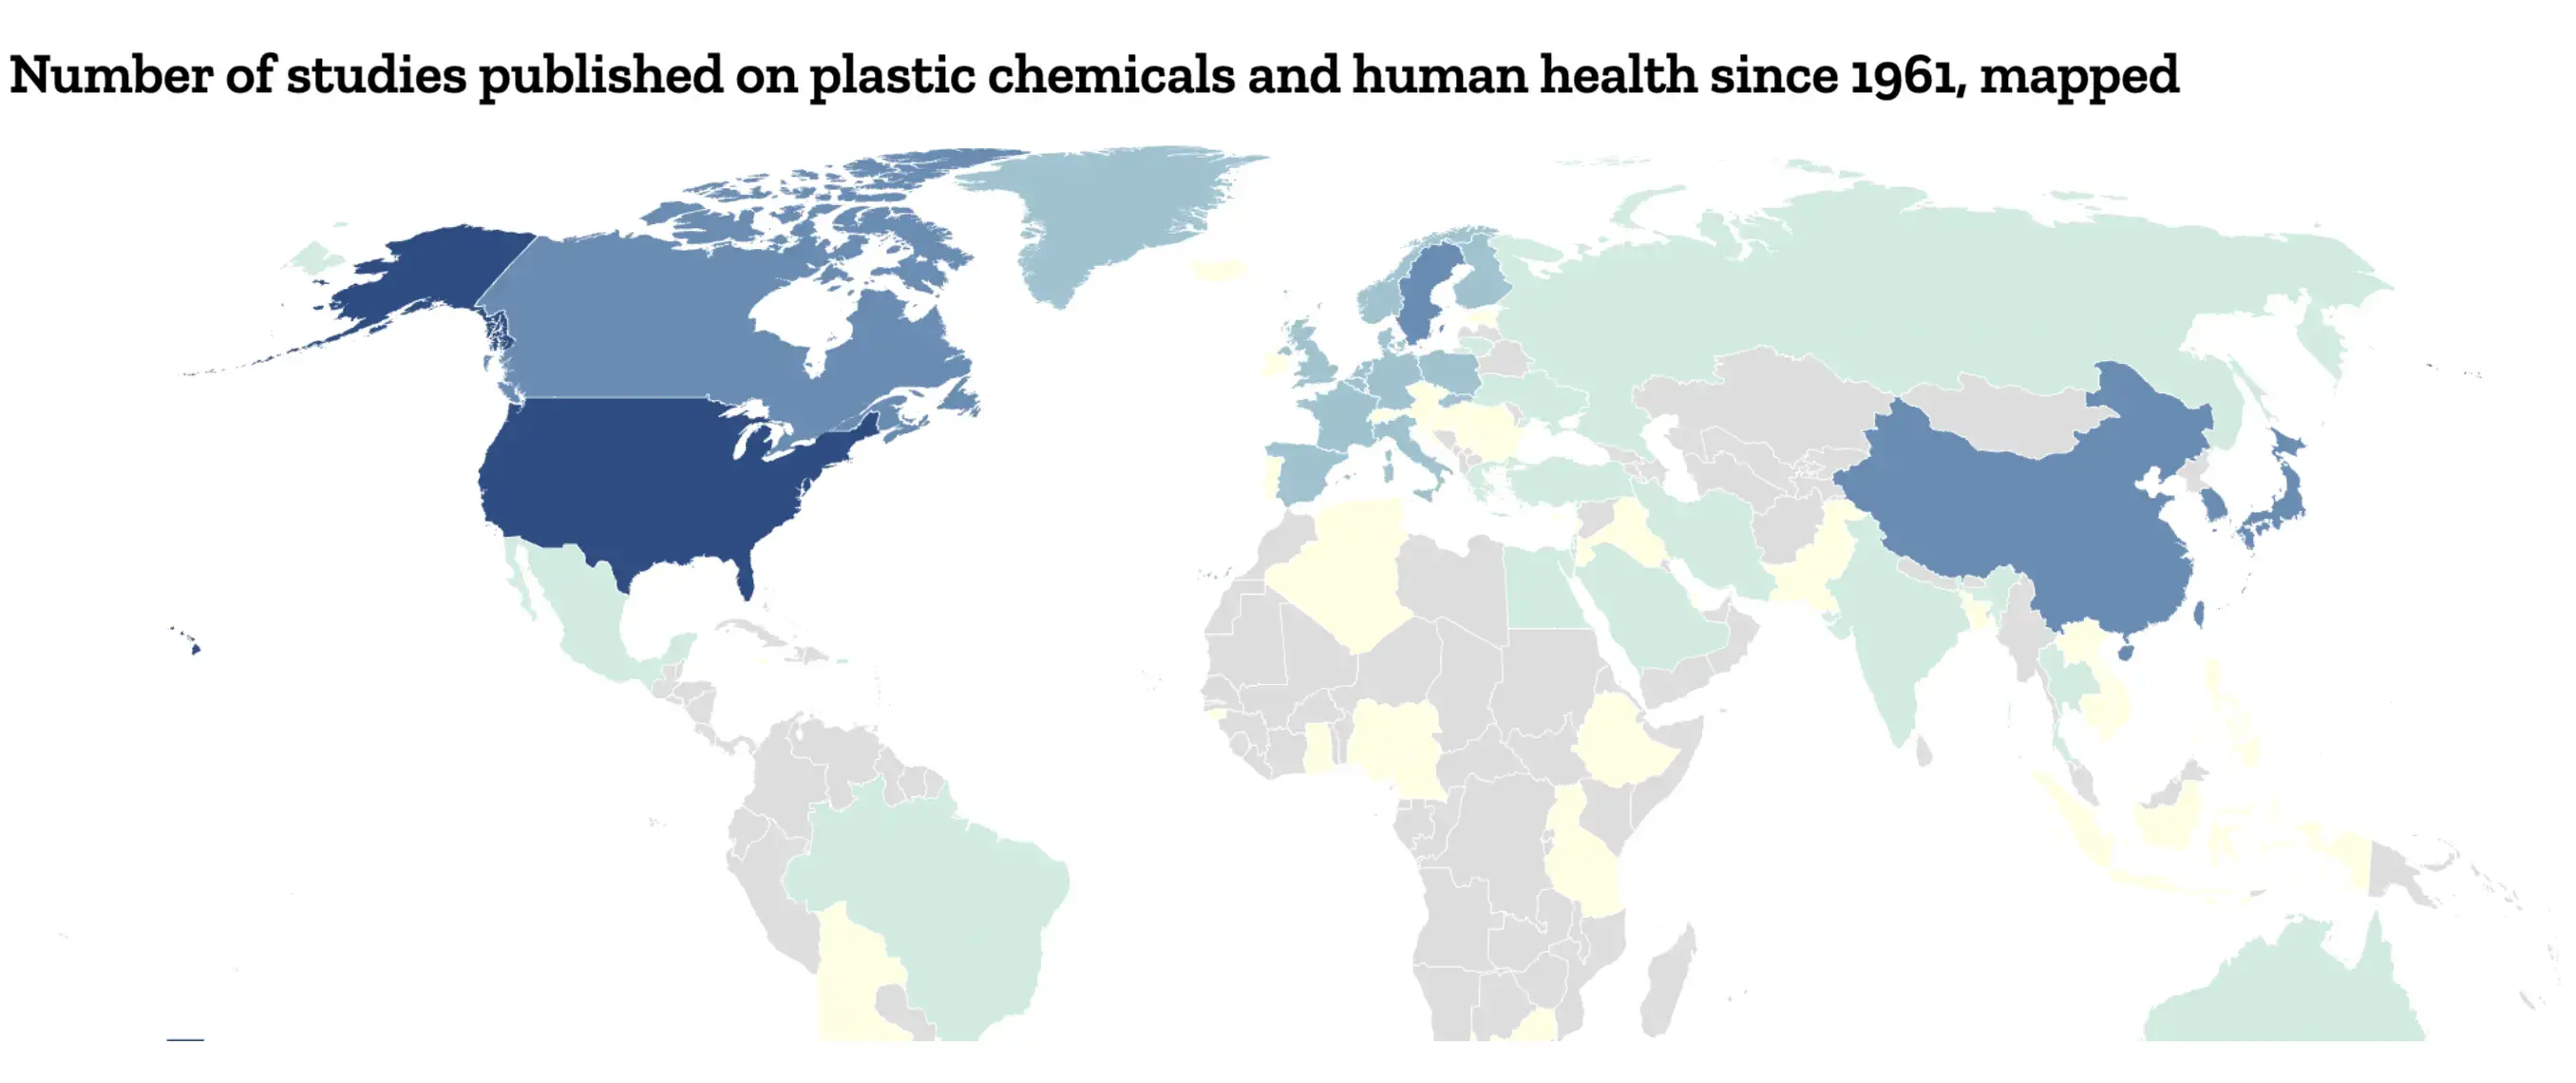 A world map displaying the number of studies published on plastic chemicals and human health since 1961, by country.